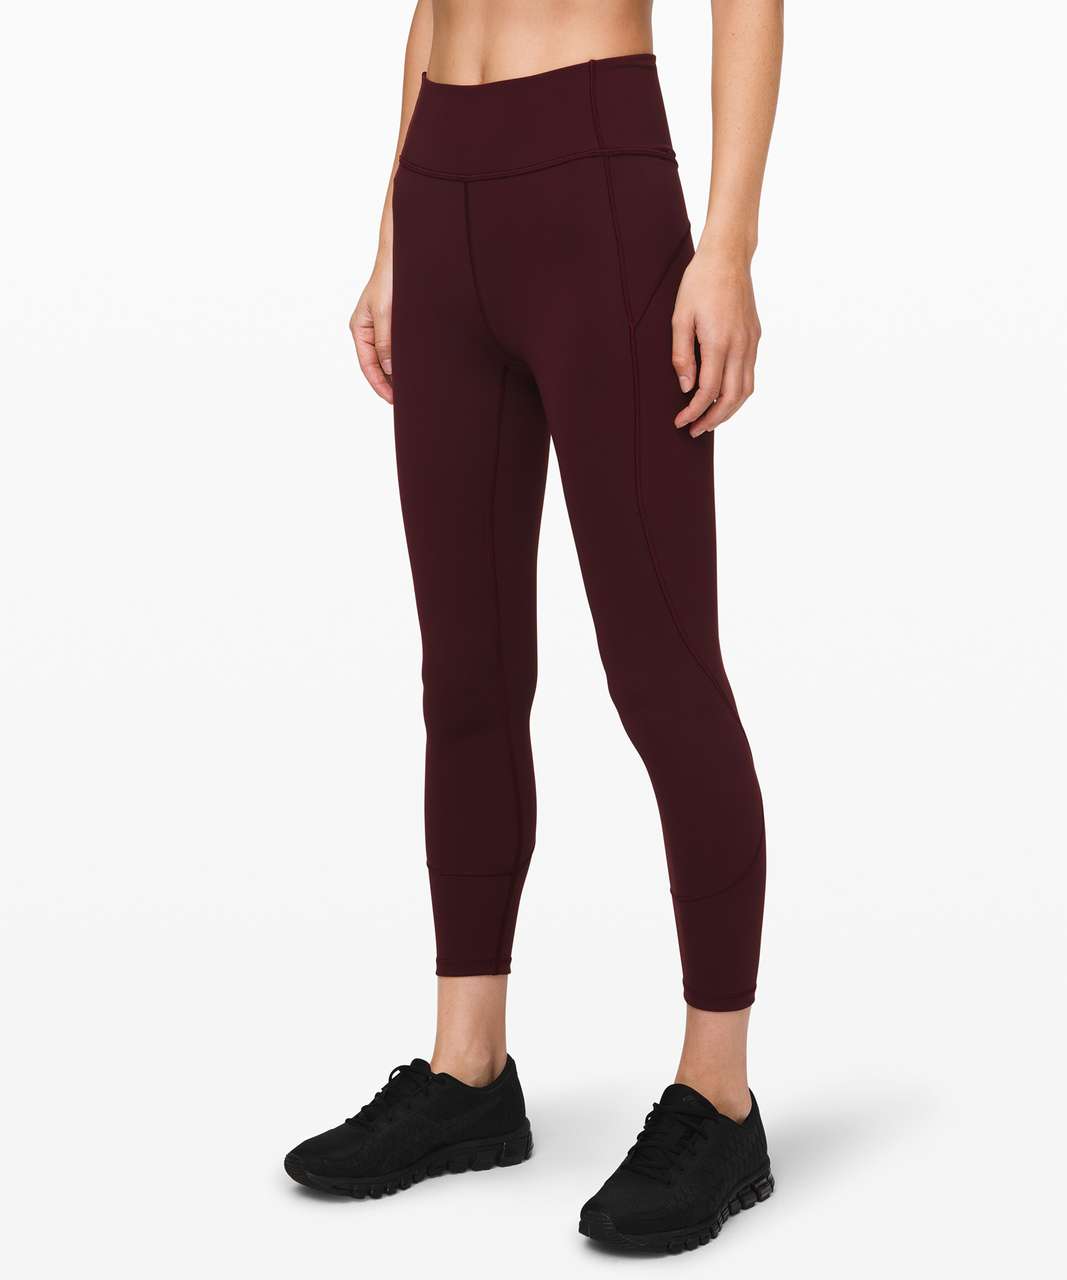 Lululemon Size 6 In Movement Tight 25 Everlux Burgundy striped